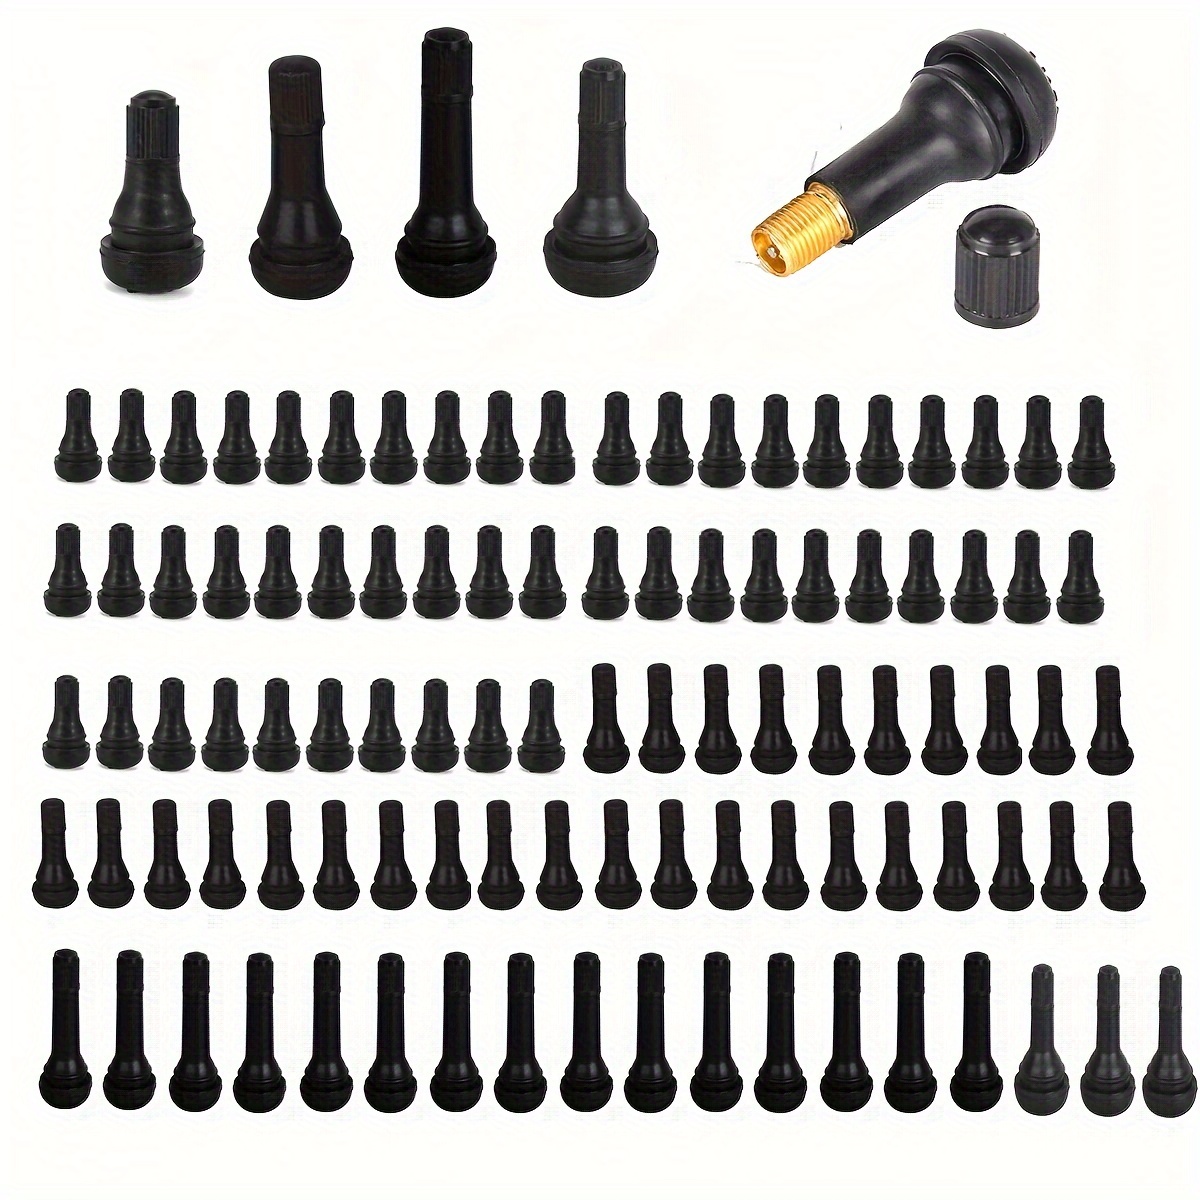 

105pcs Tire Valve Stems Tr412, Tr413, Tr414, Tr415 Black Rubber Snap-in Valve Stems For Replacement Of Tubeless Rim Holes On Standard Vehicle Tires